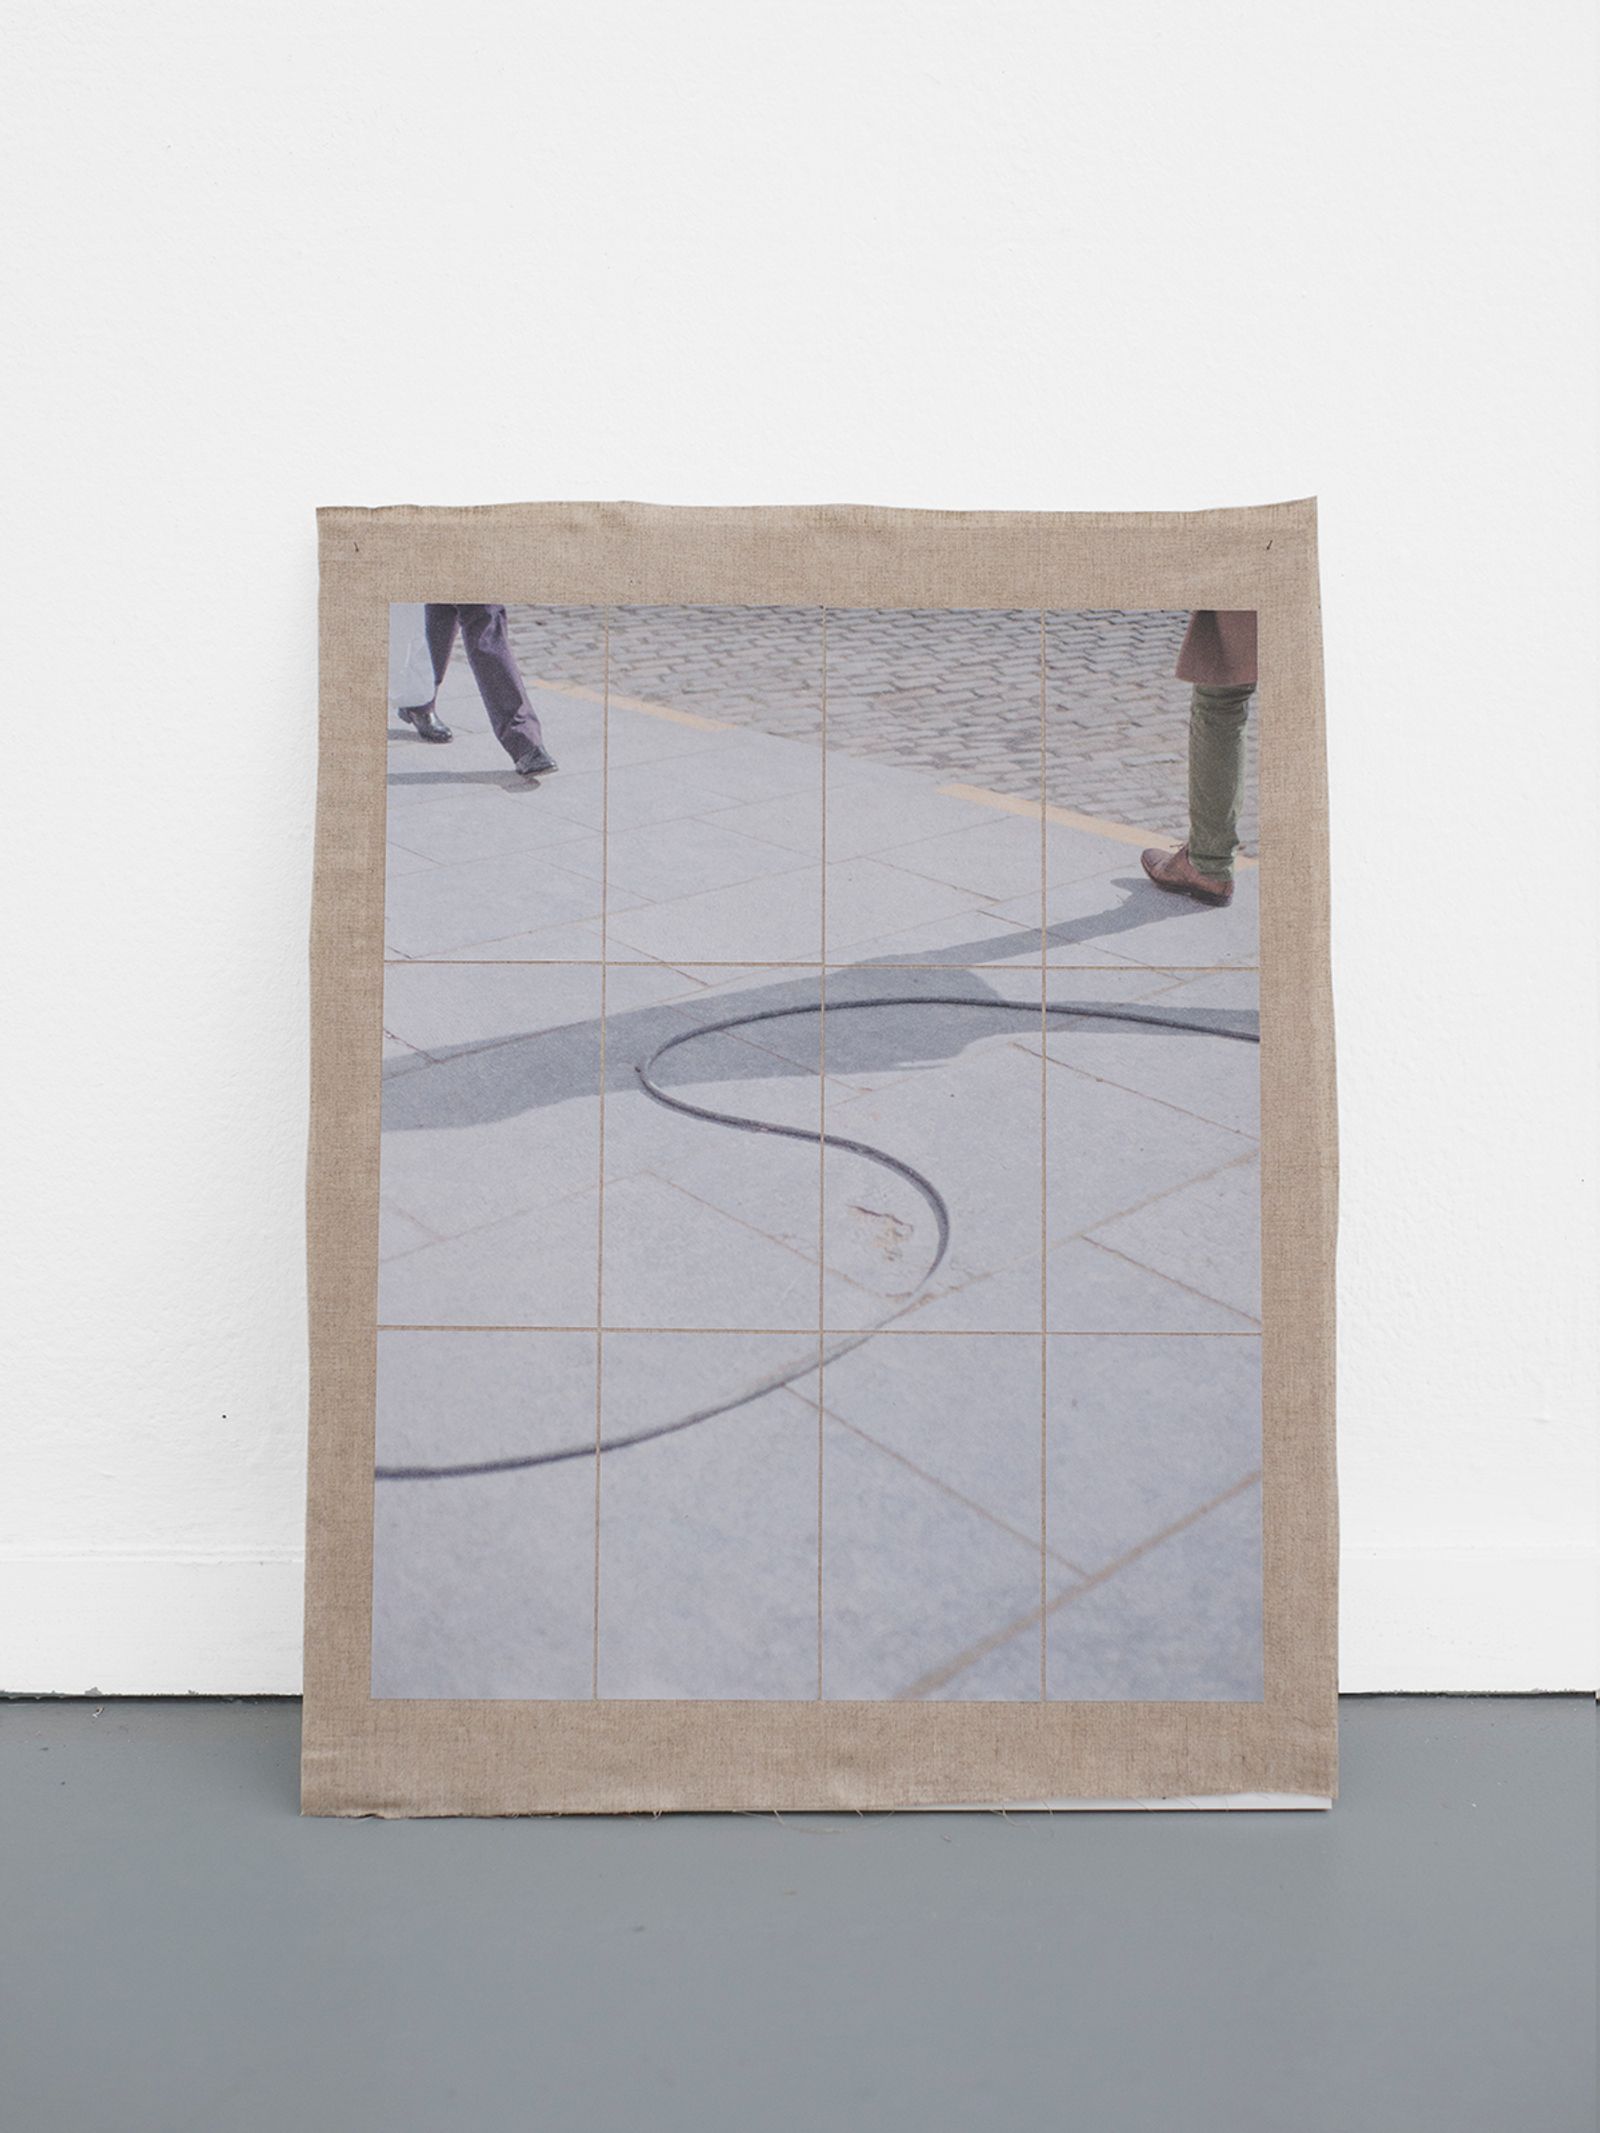 © Esther Hovers - Structures, Walking, 2019 58 x 46 cm / 22.8 x 18.1 in. Inkjet prints on Tosa Shi – 54 gsm, fixed on linen.